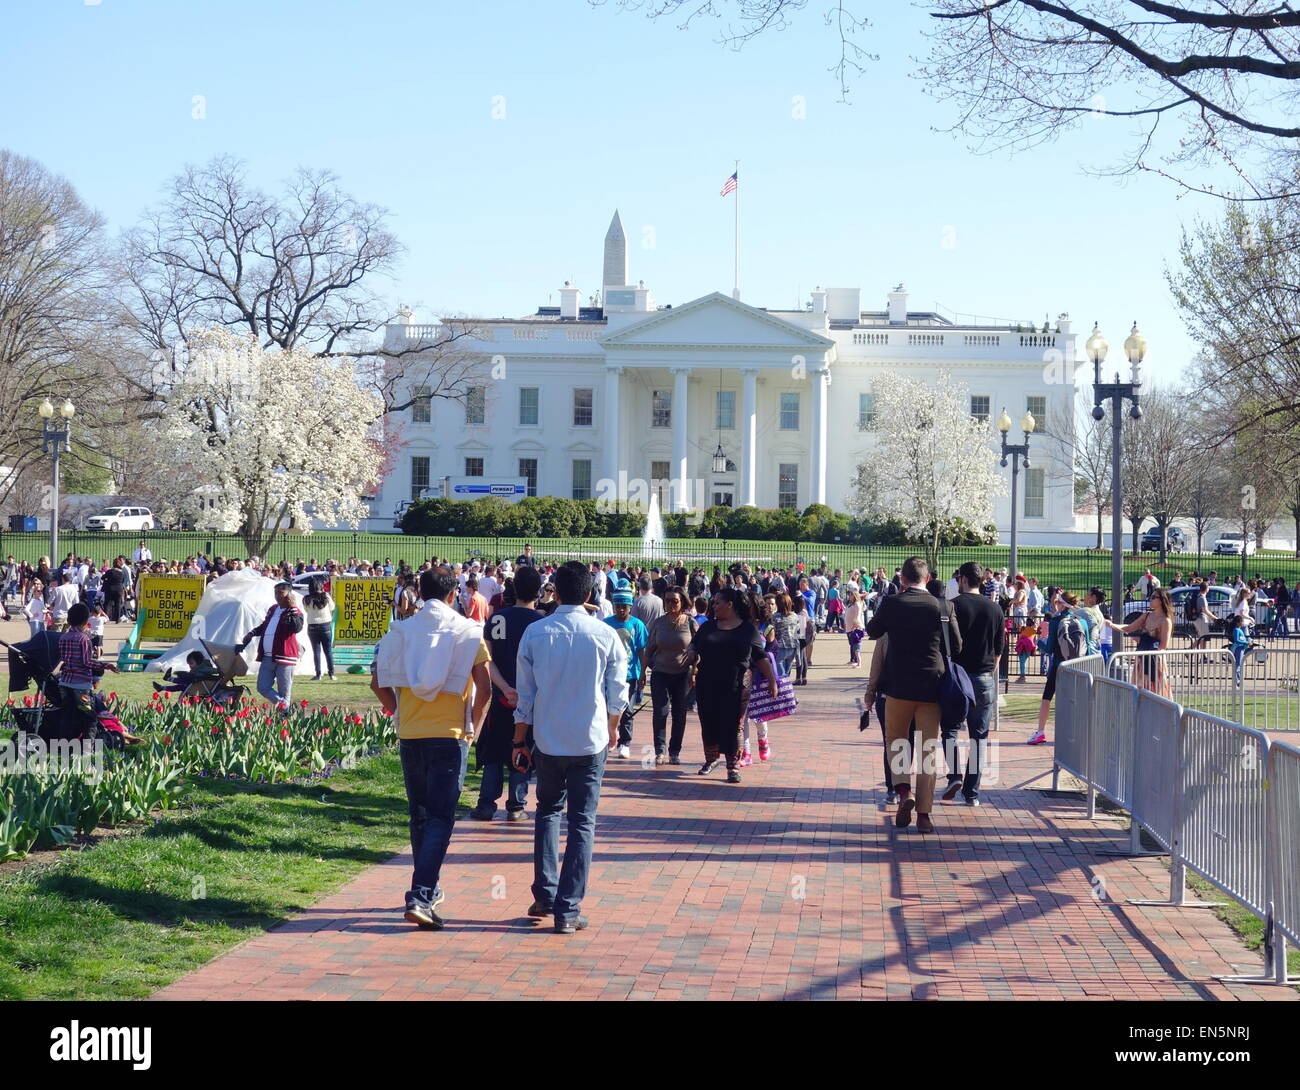 Crowd of tourists in front of the White House in Washington DC Stock Photo